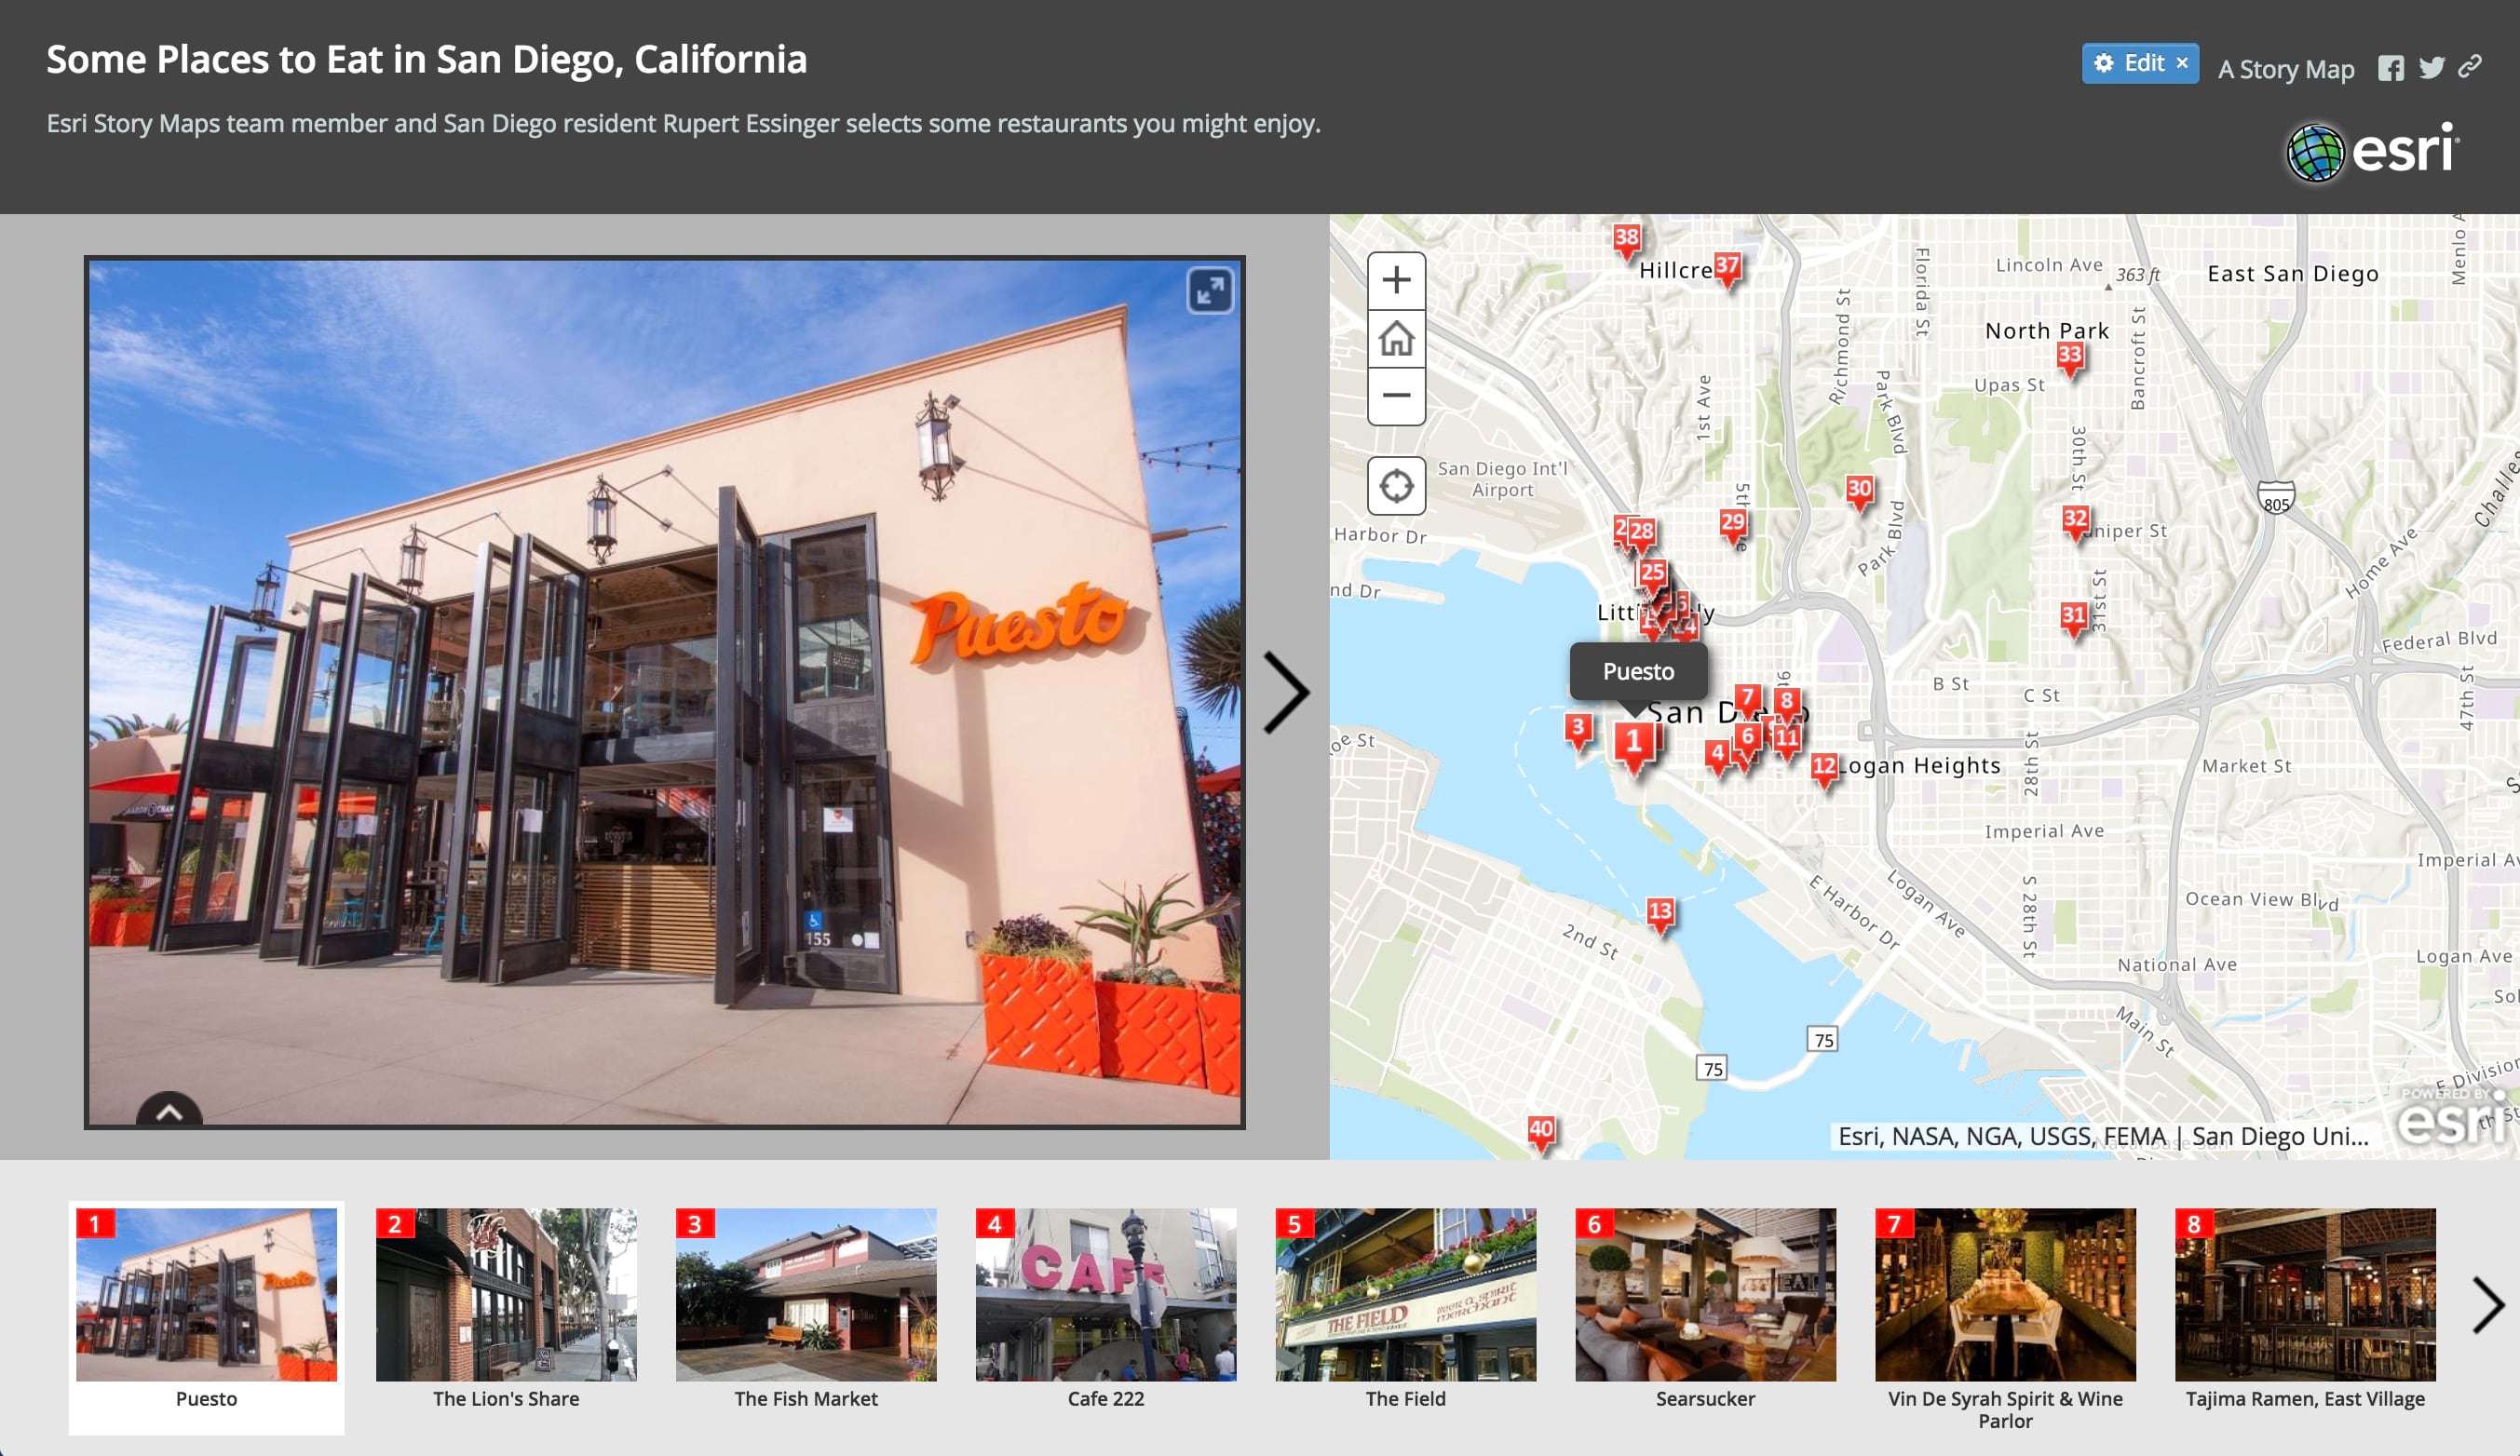 Some Places to Eat in San Diego story map